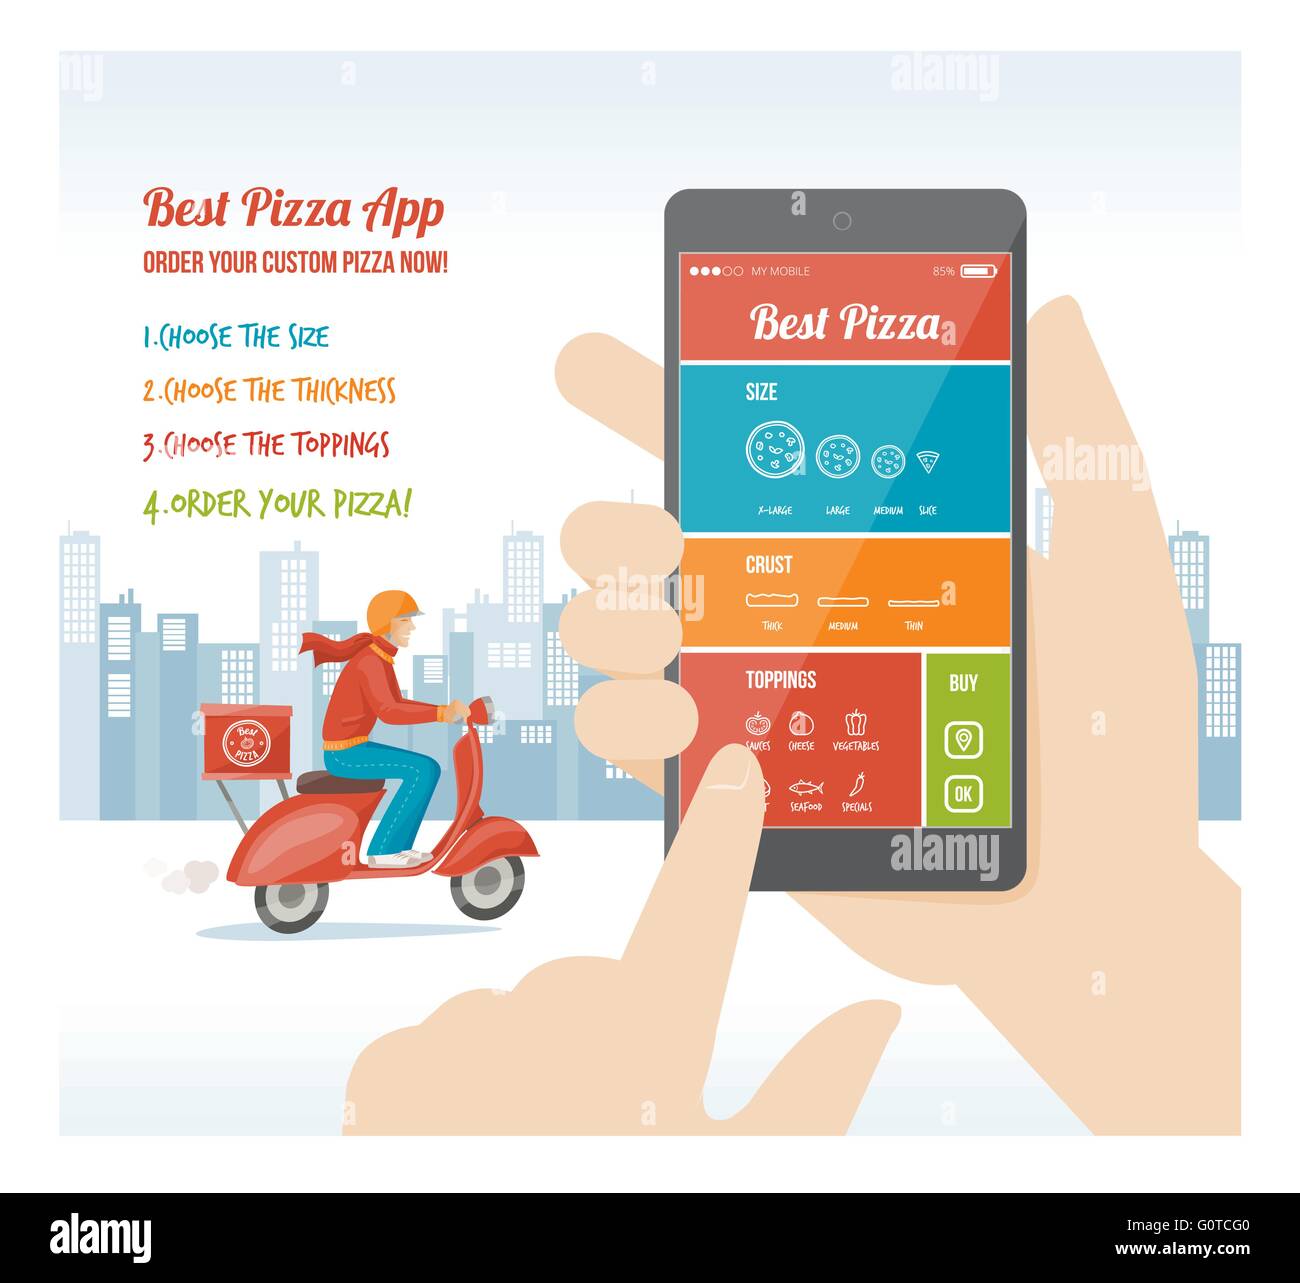 Best pizza app interface design with ingredient and icons on mobile display Stock Vector